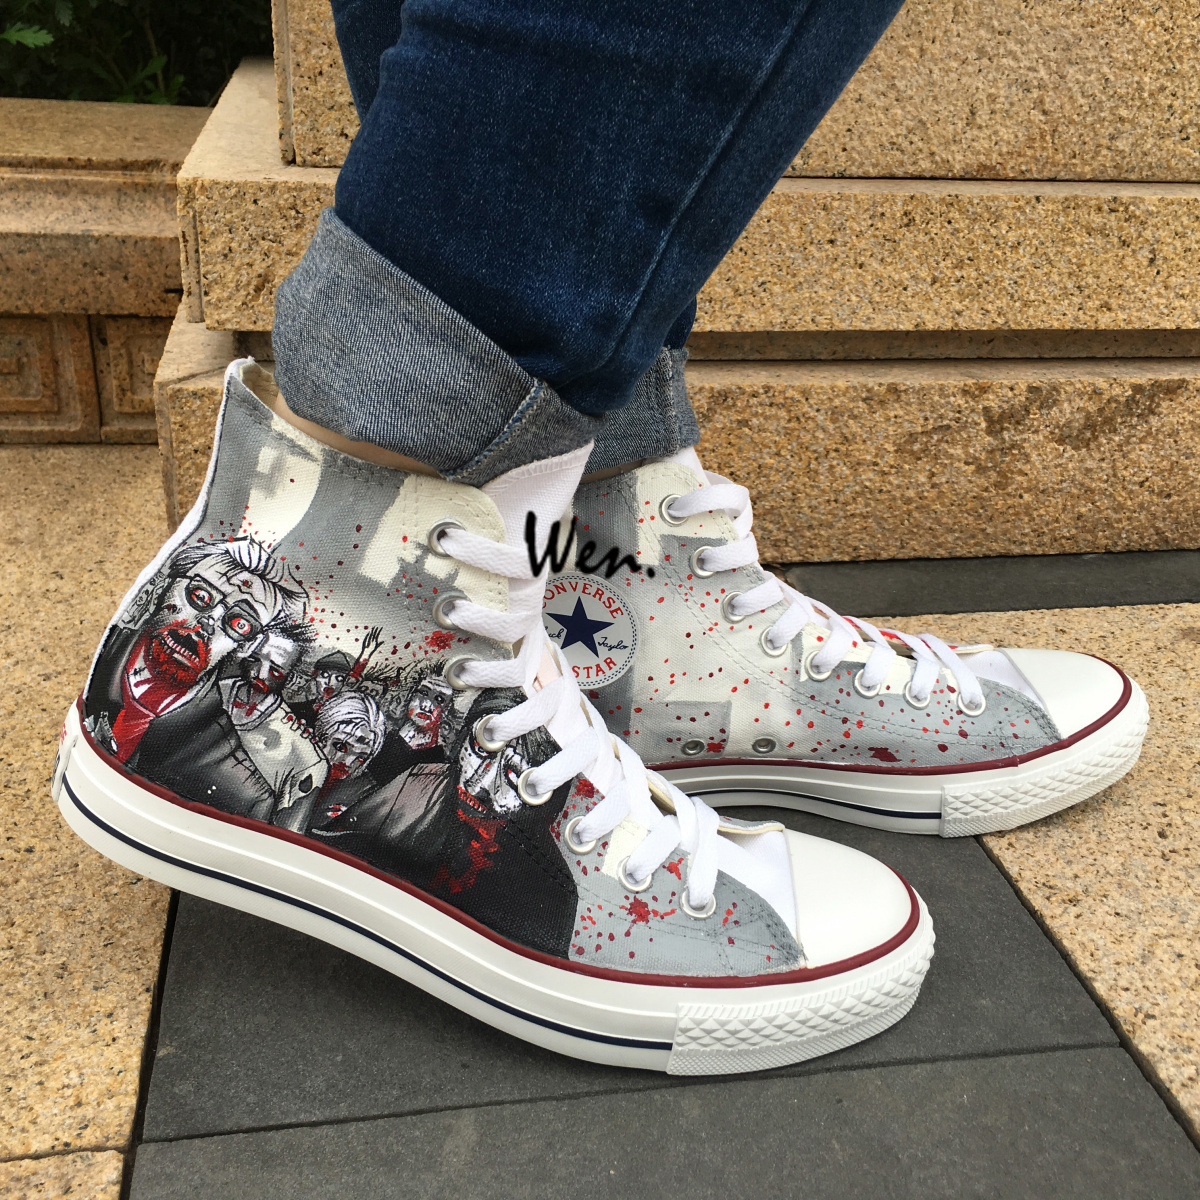 Converse/fashion - Hand painted shoes zombies walking dead converse all star high top canvas shoes